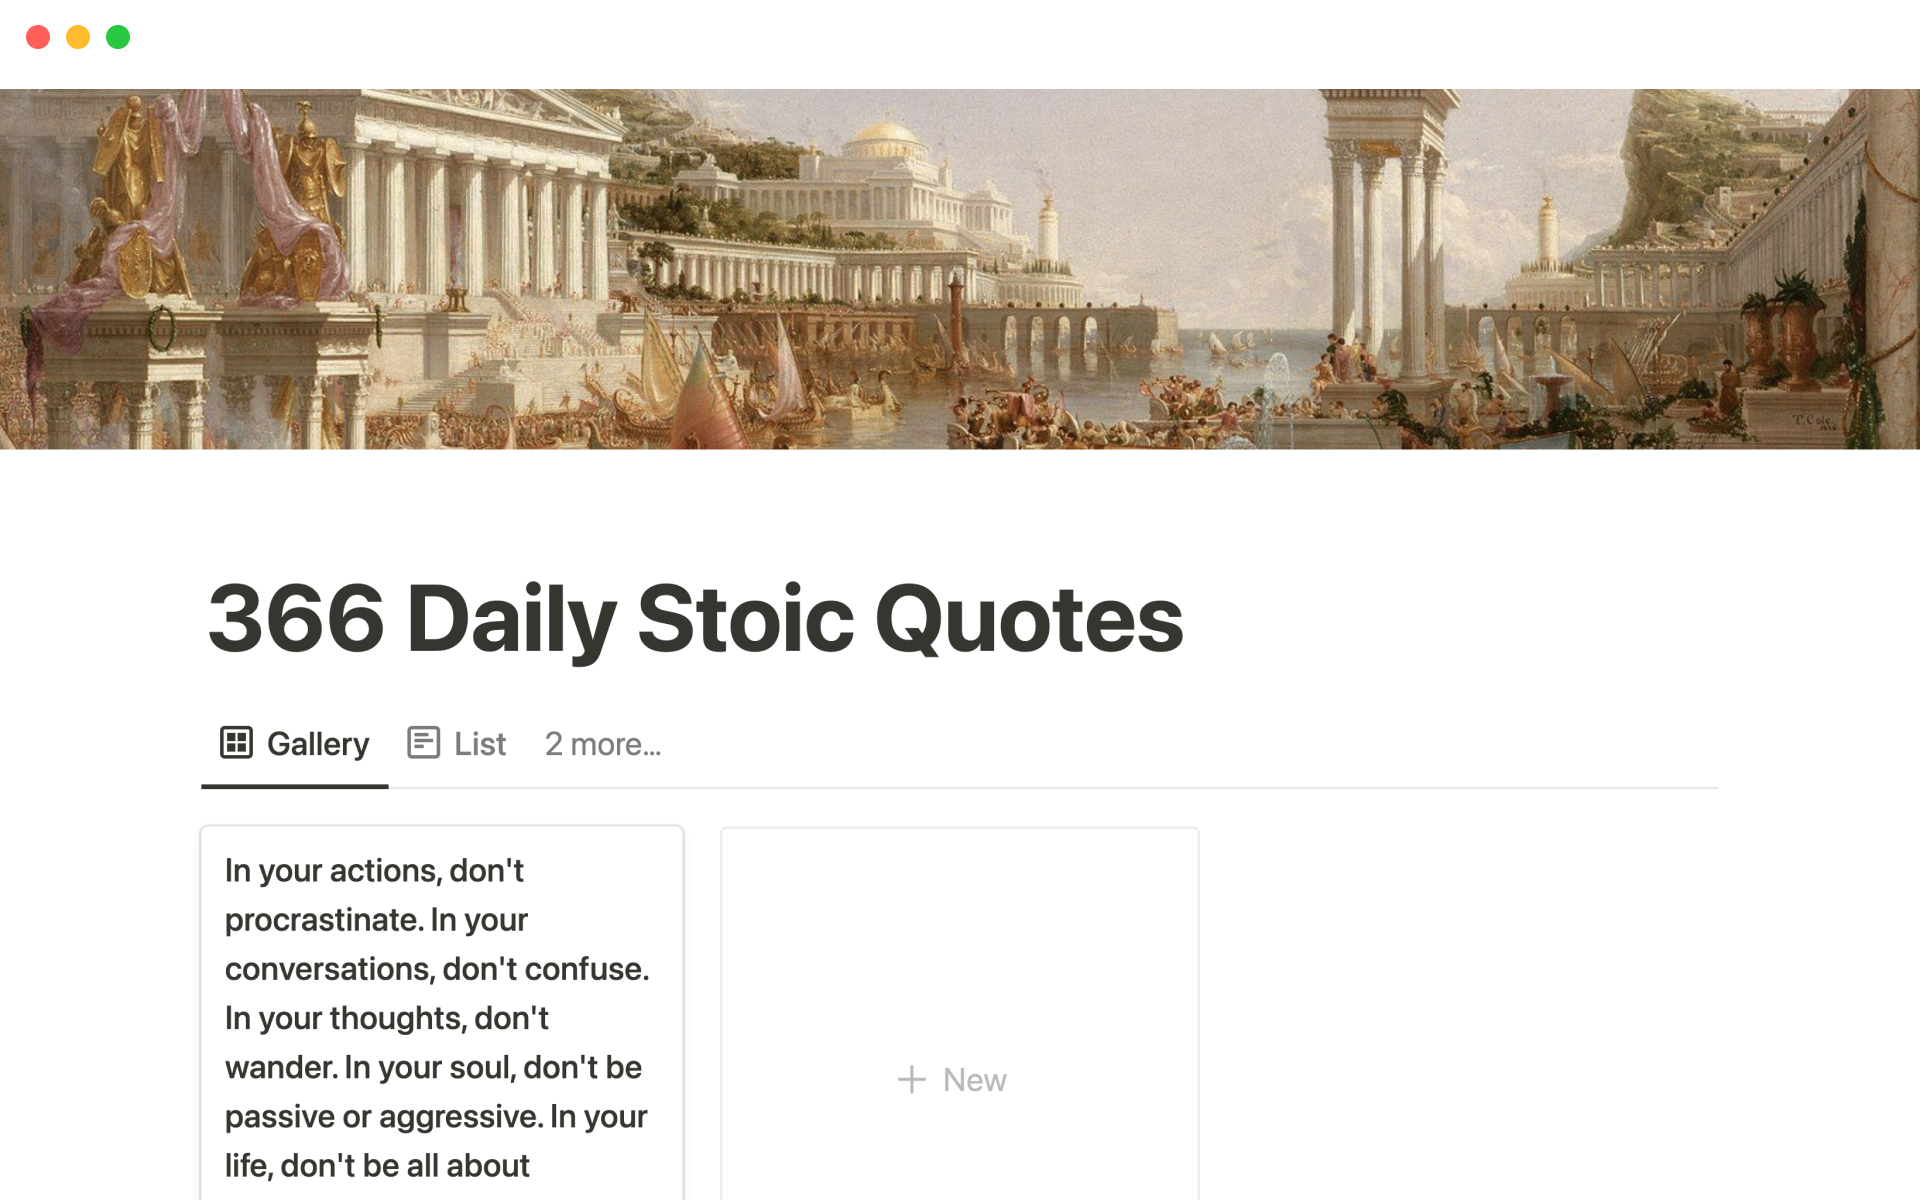 Display a daily inspirational stoic quote in your workspace.